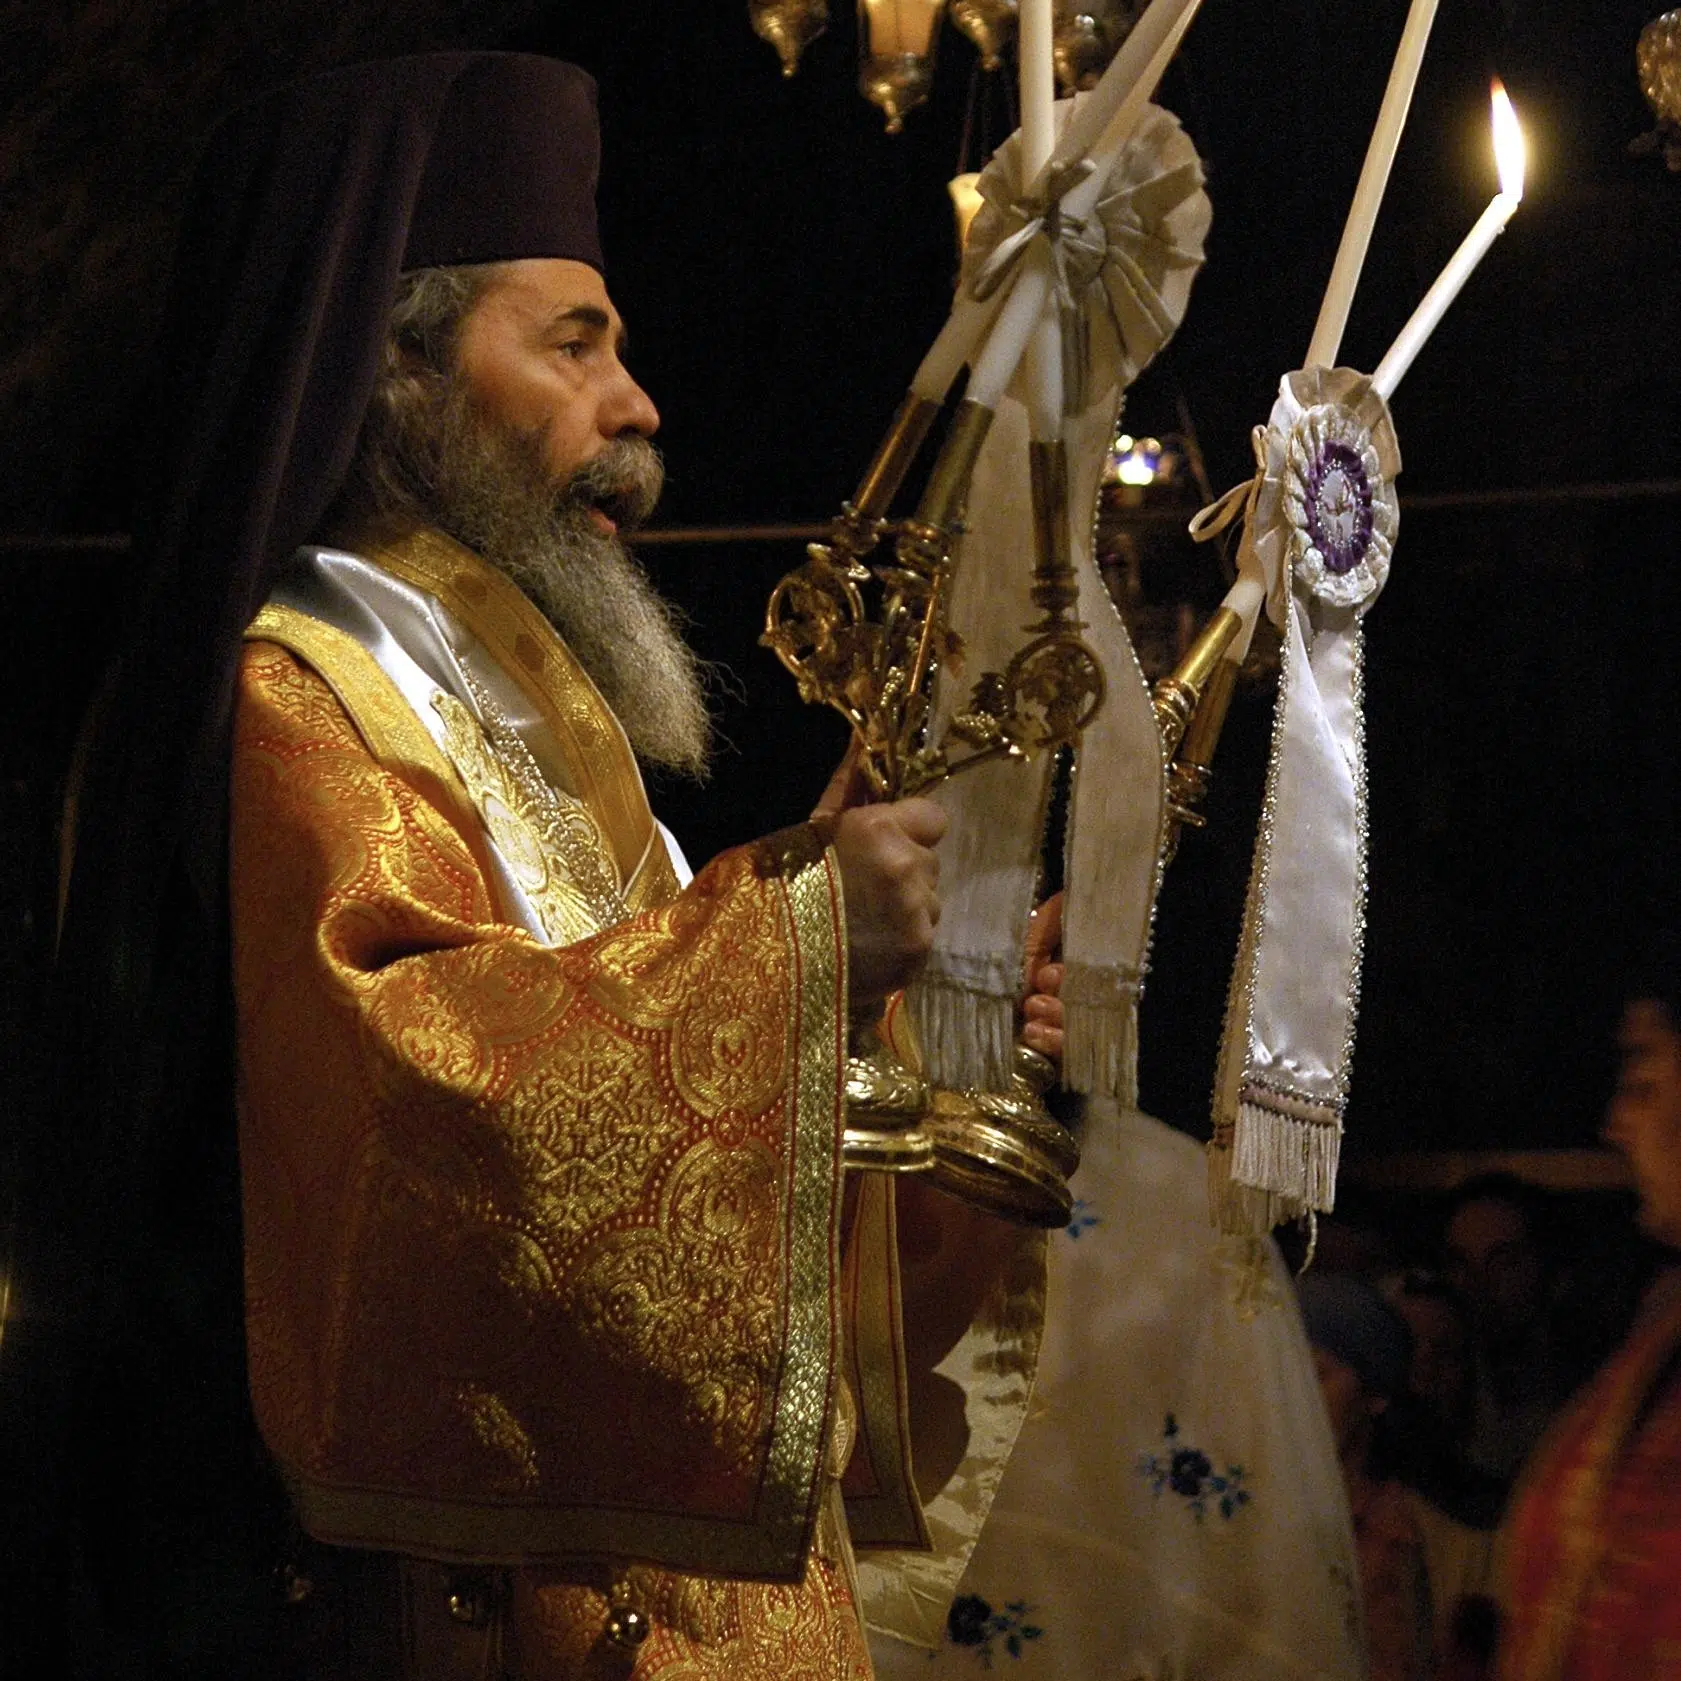 Patriarch Theophilus I